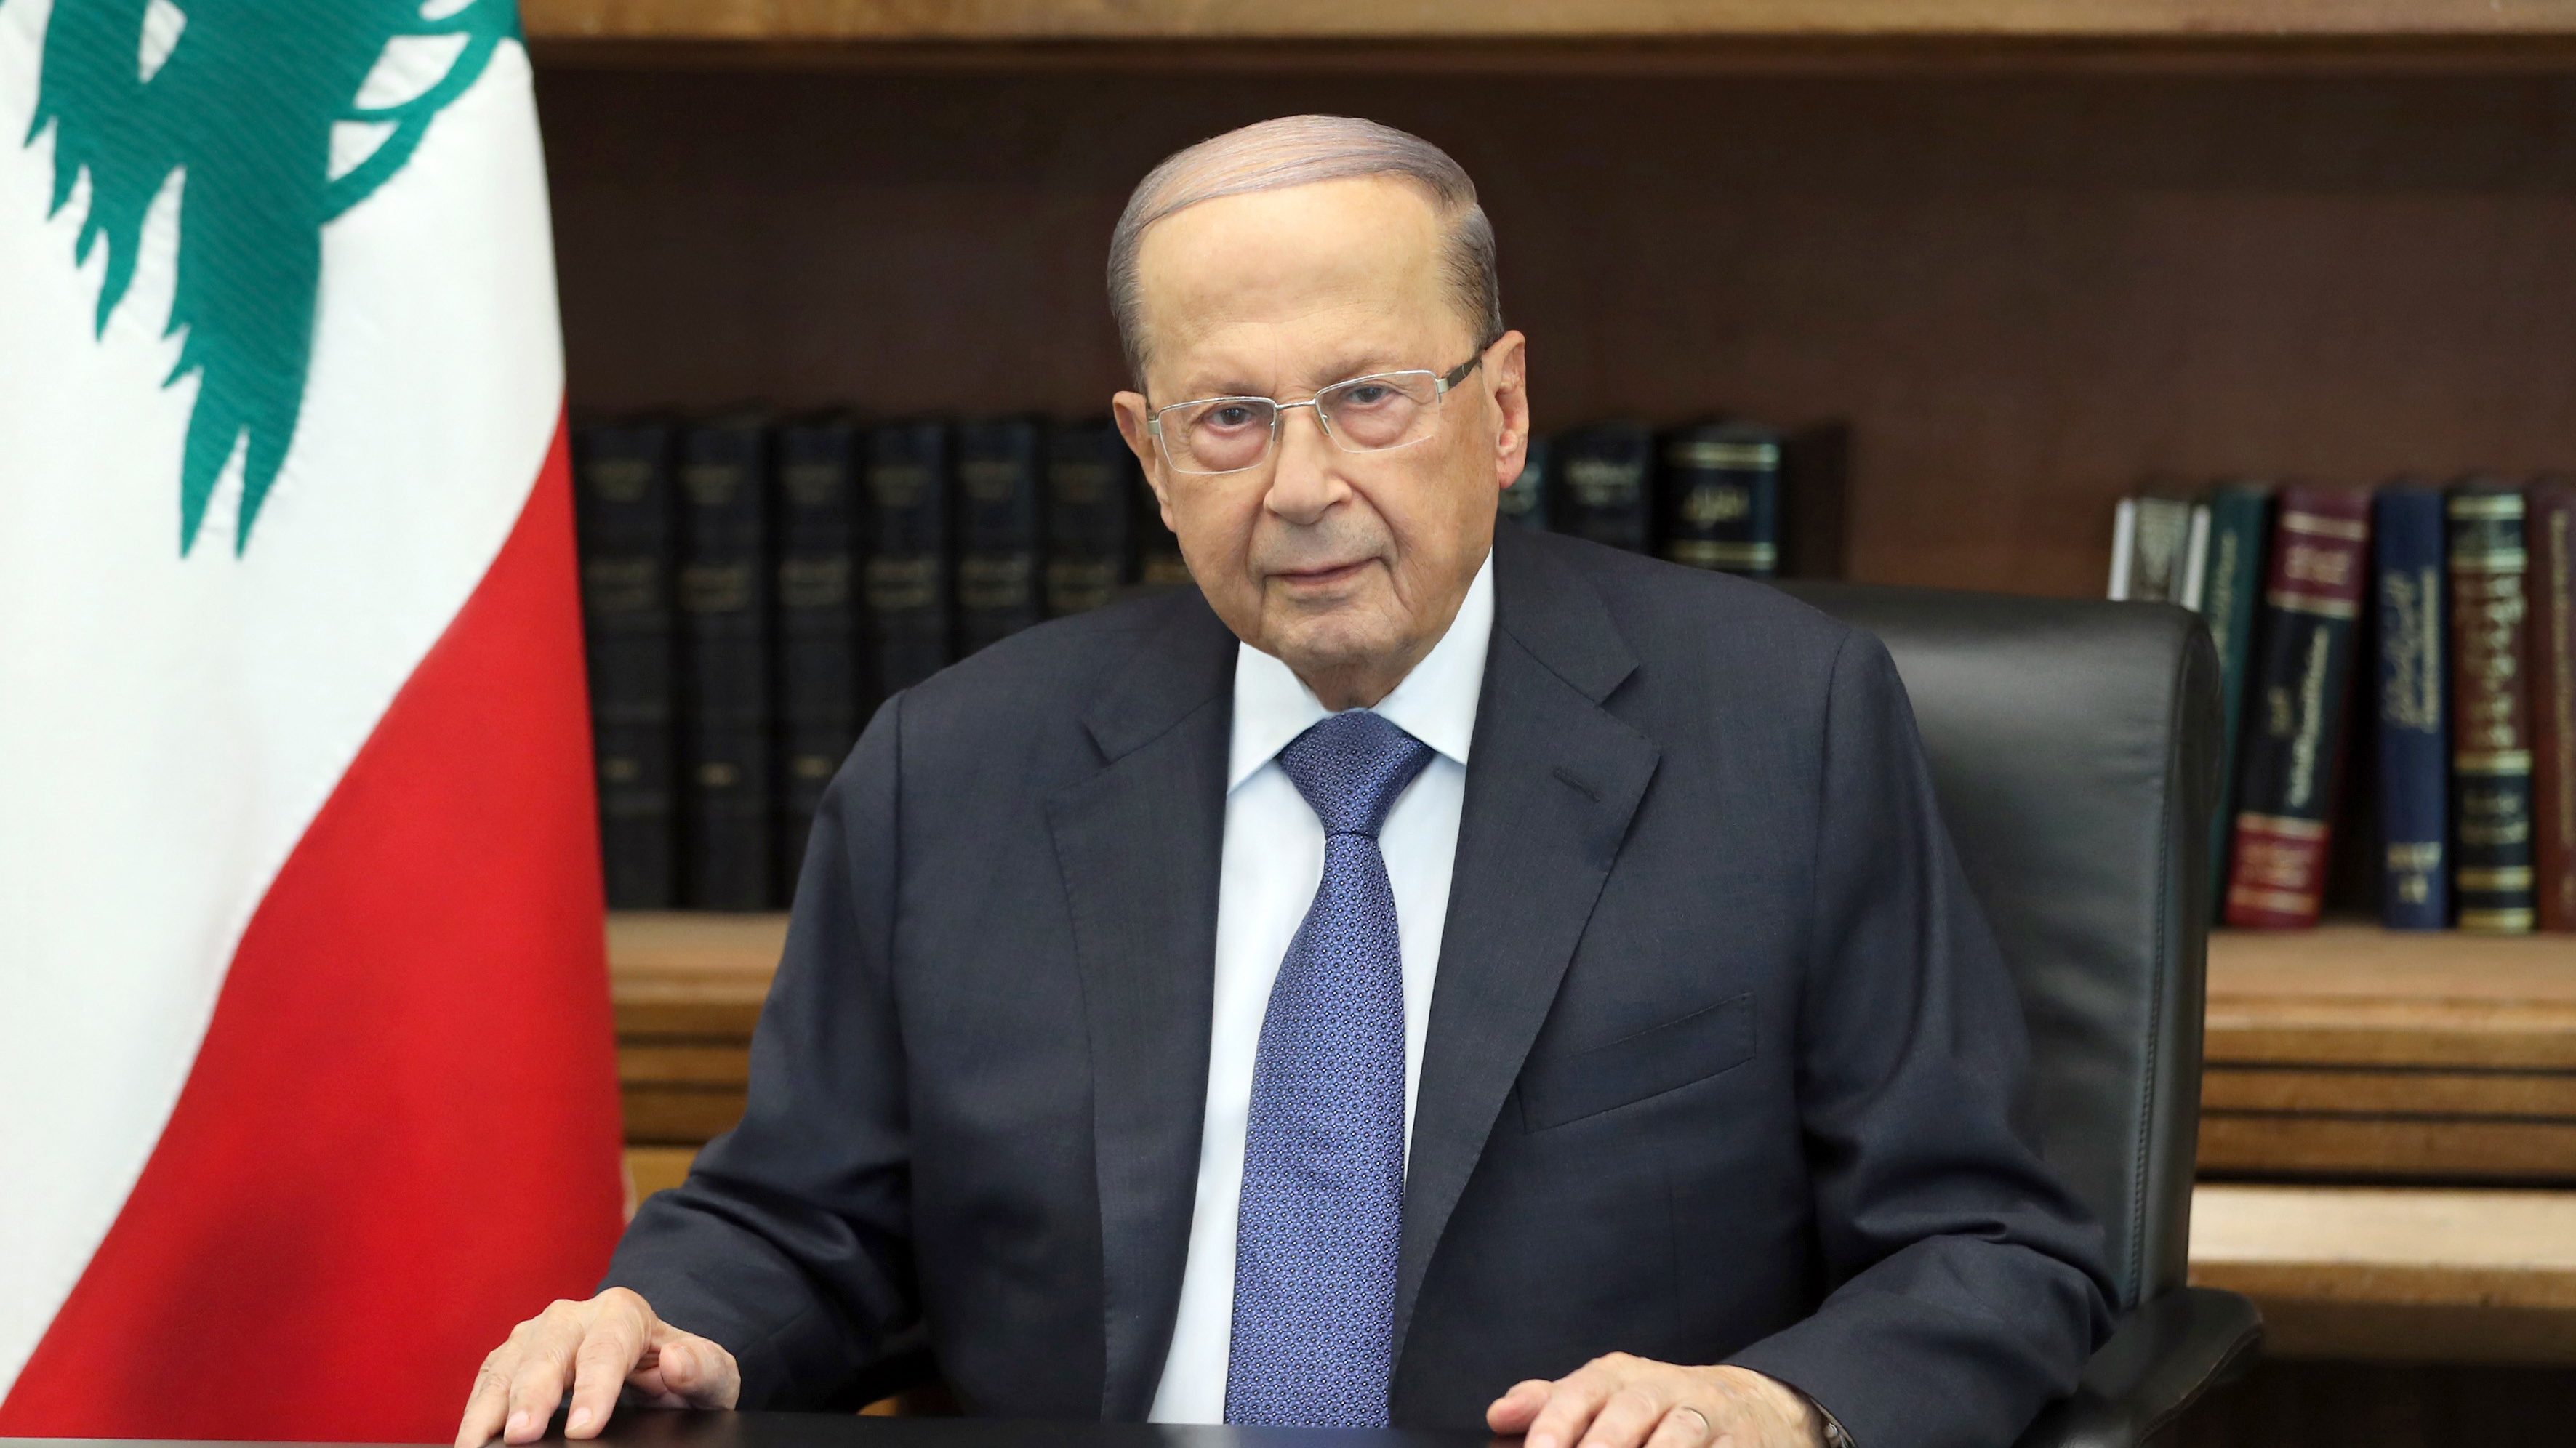 Michel Aoun and Coming to Terms with Reality